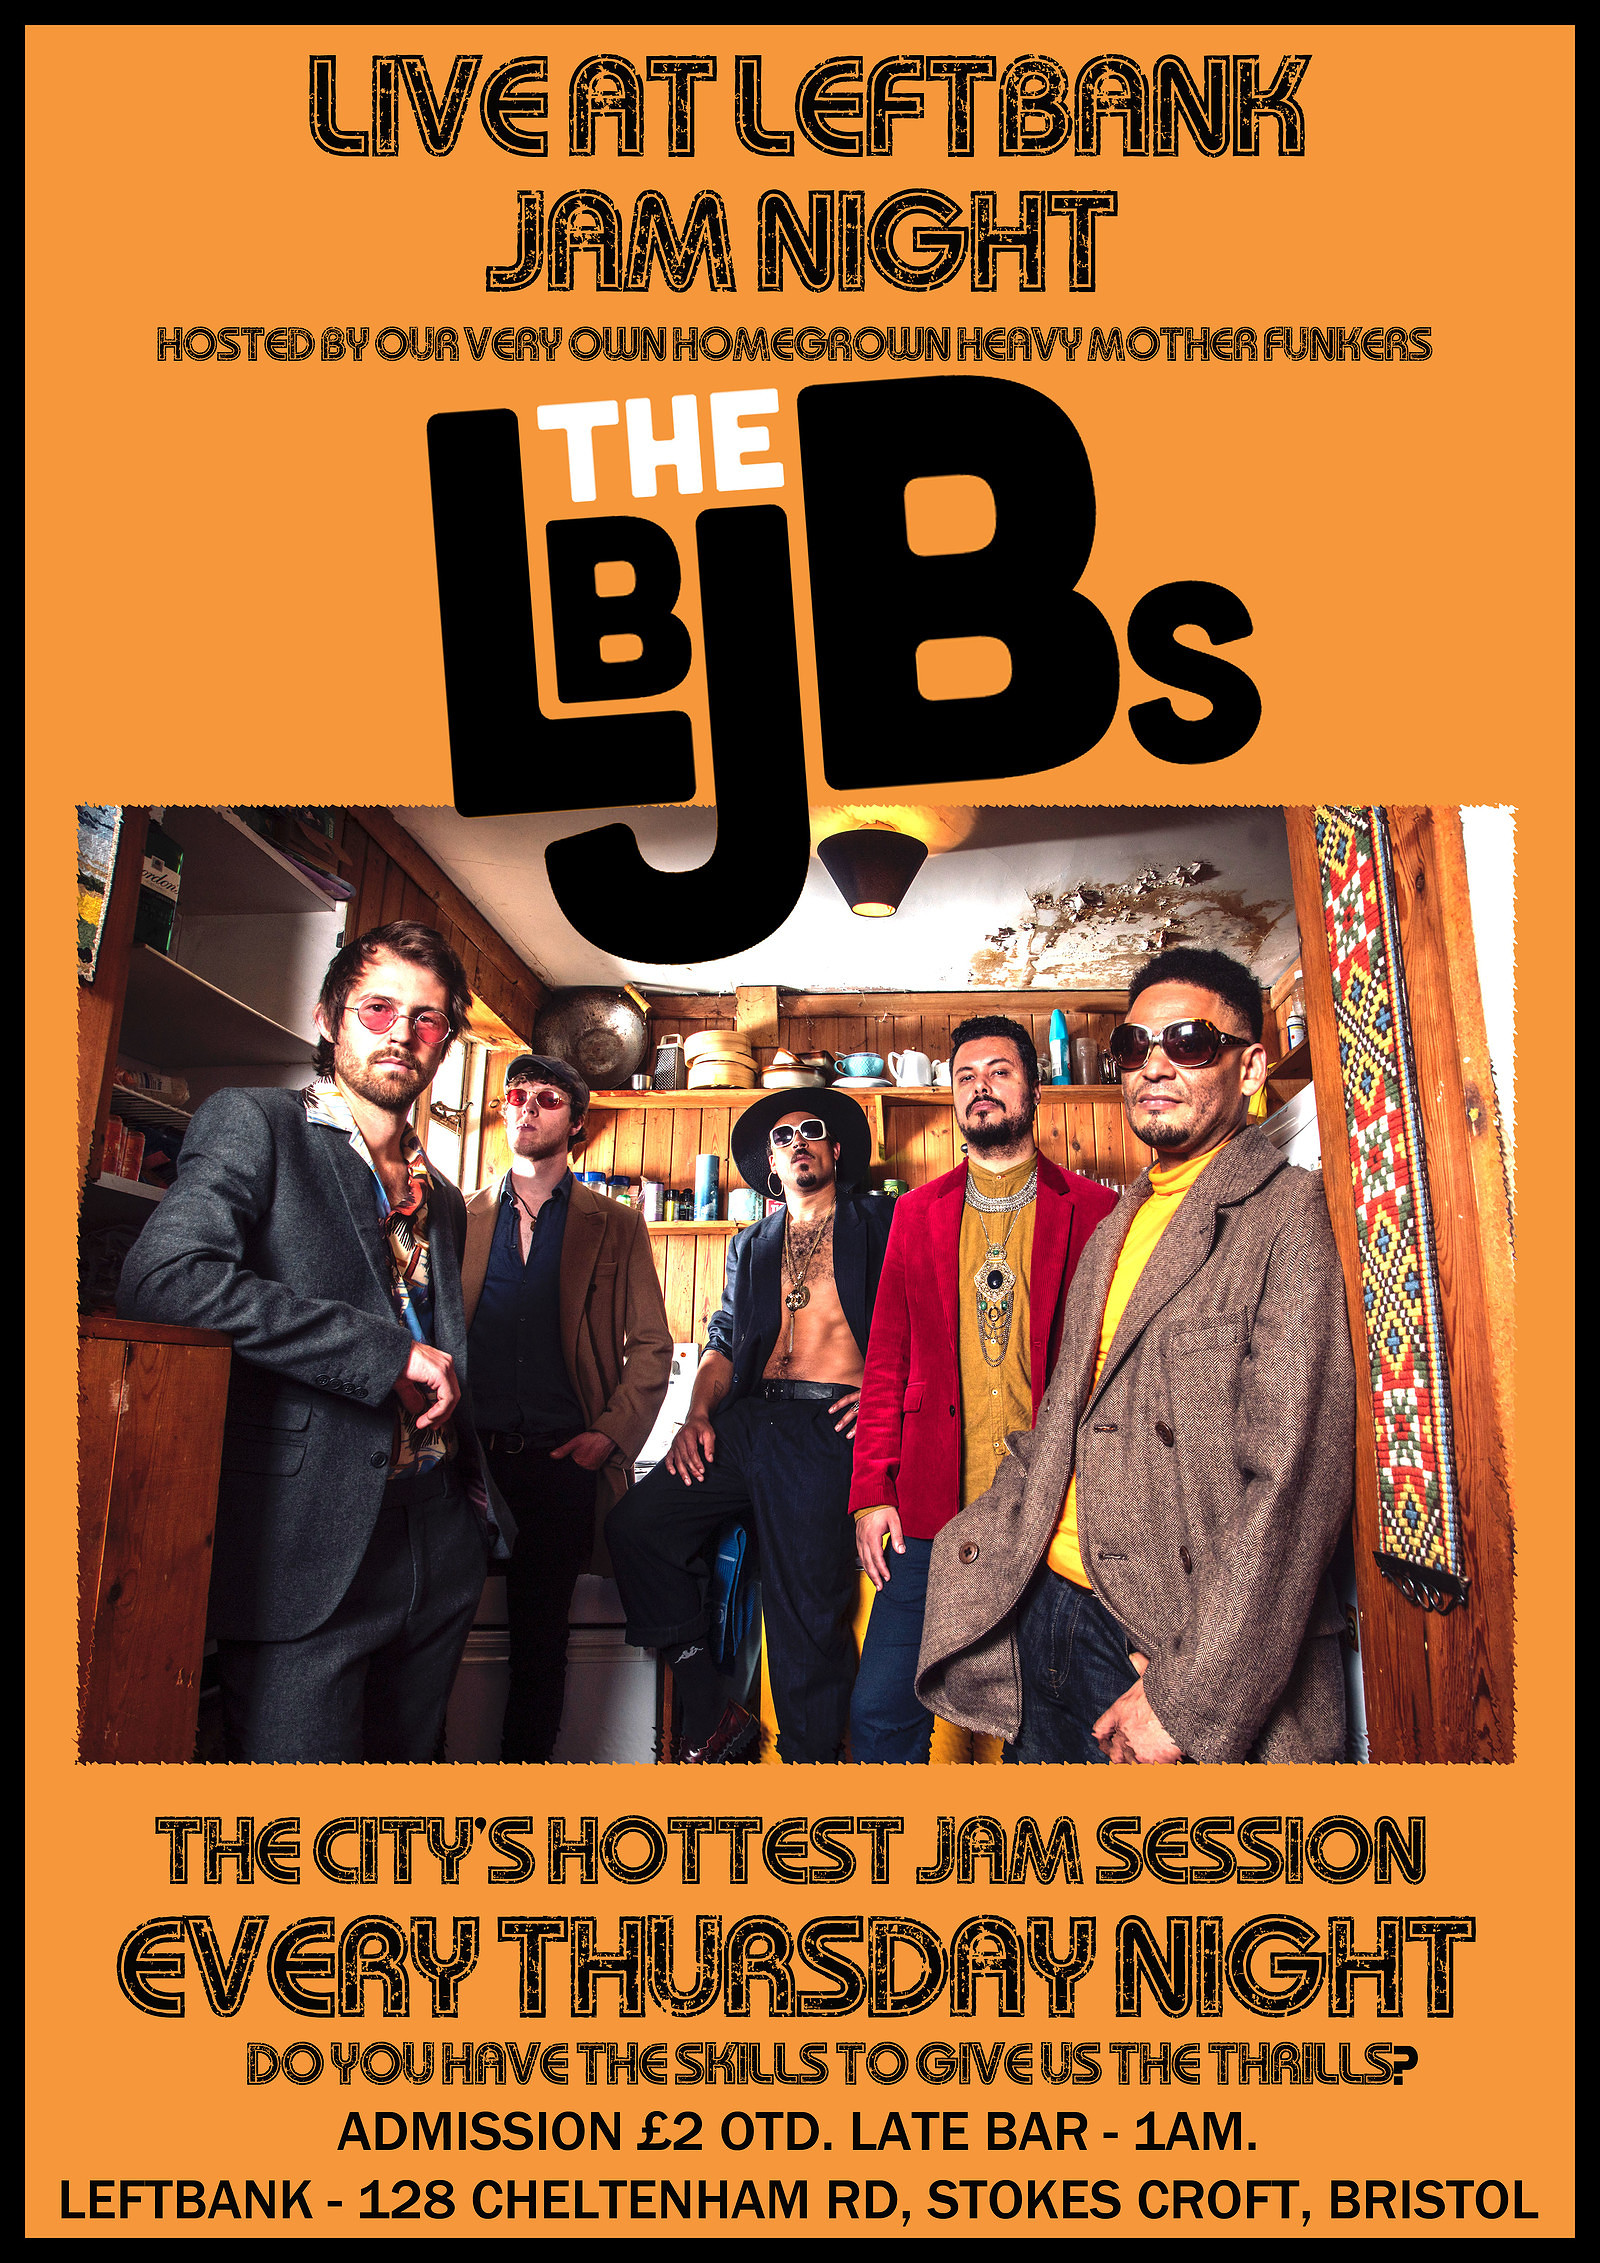 JAM SESSION HOSTED BY THE LBJBS at LEFTBANK